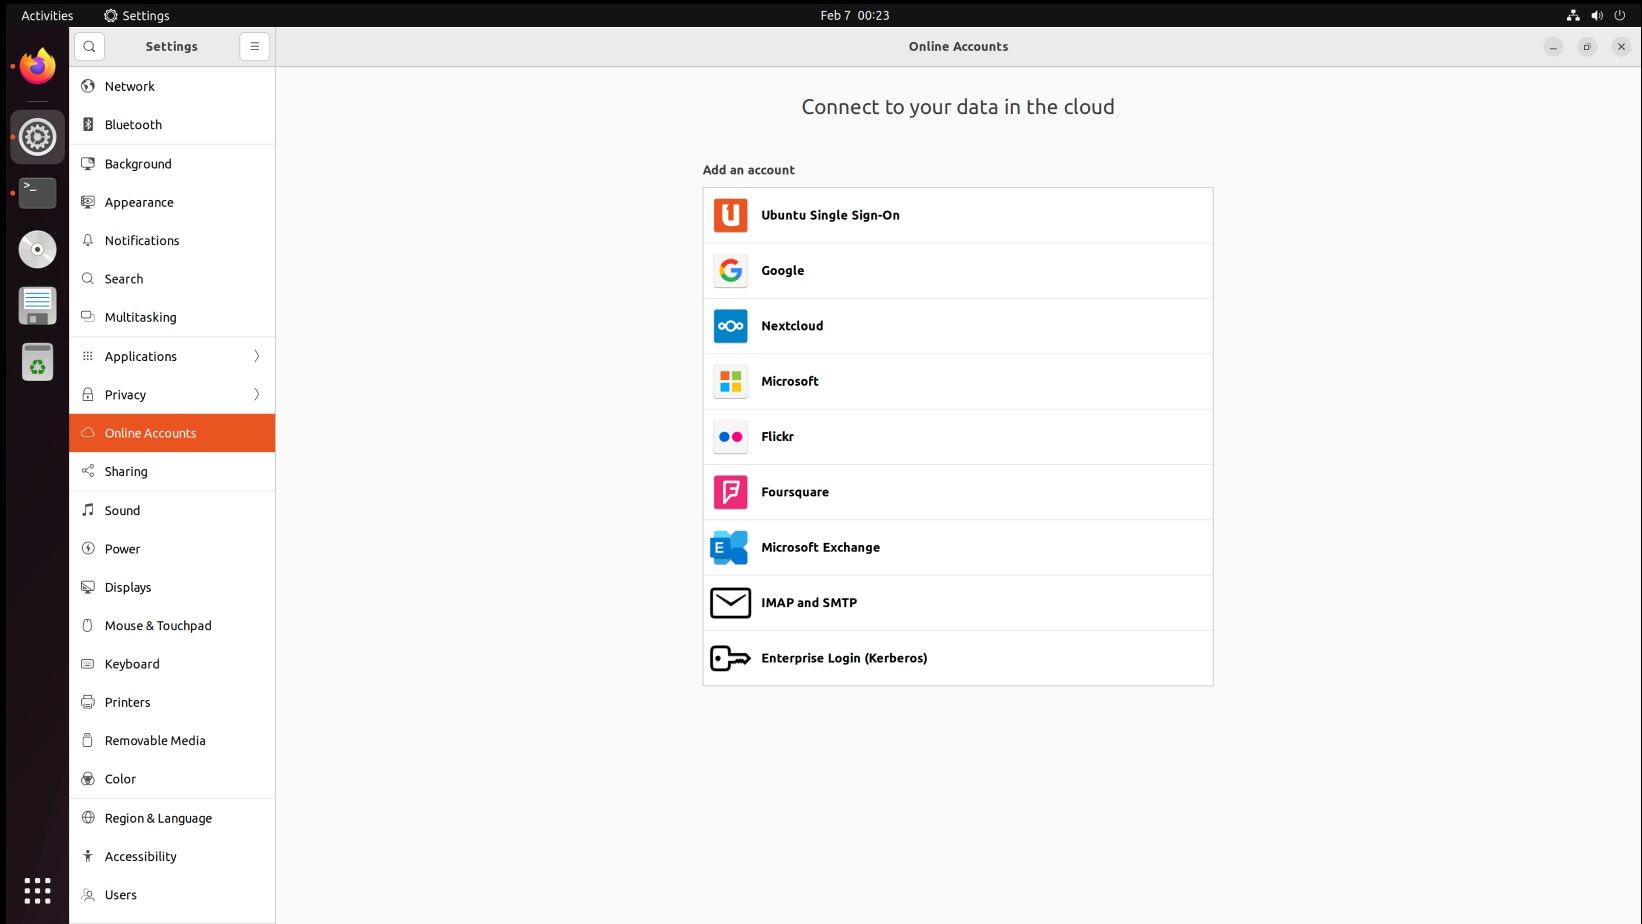 Online accounts setup page in Ubuntu 22.04 with various sign-on options